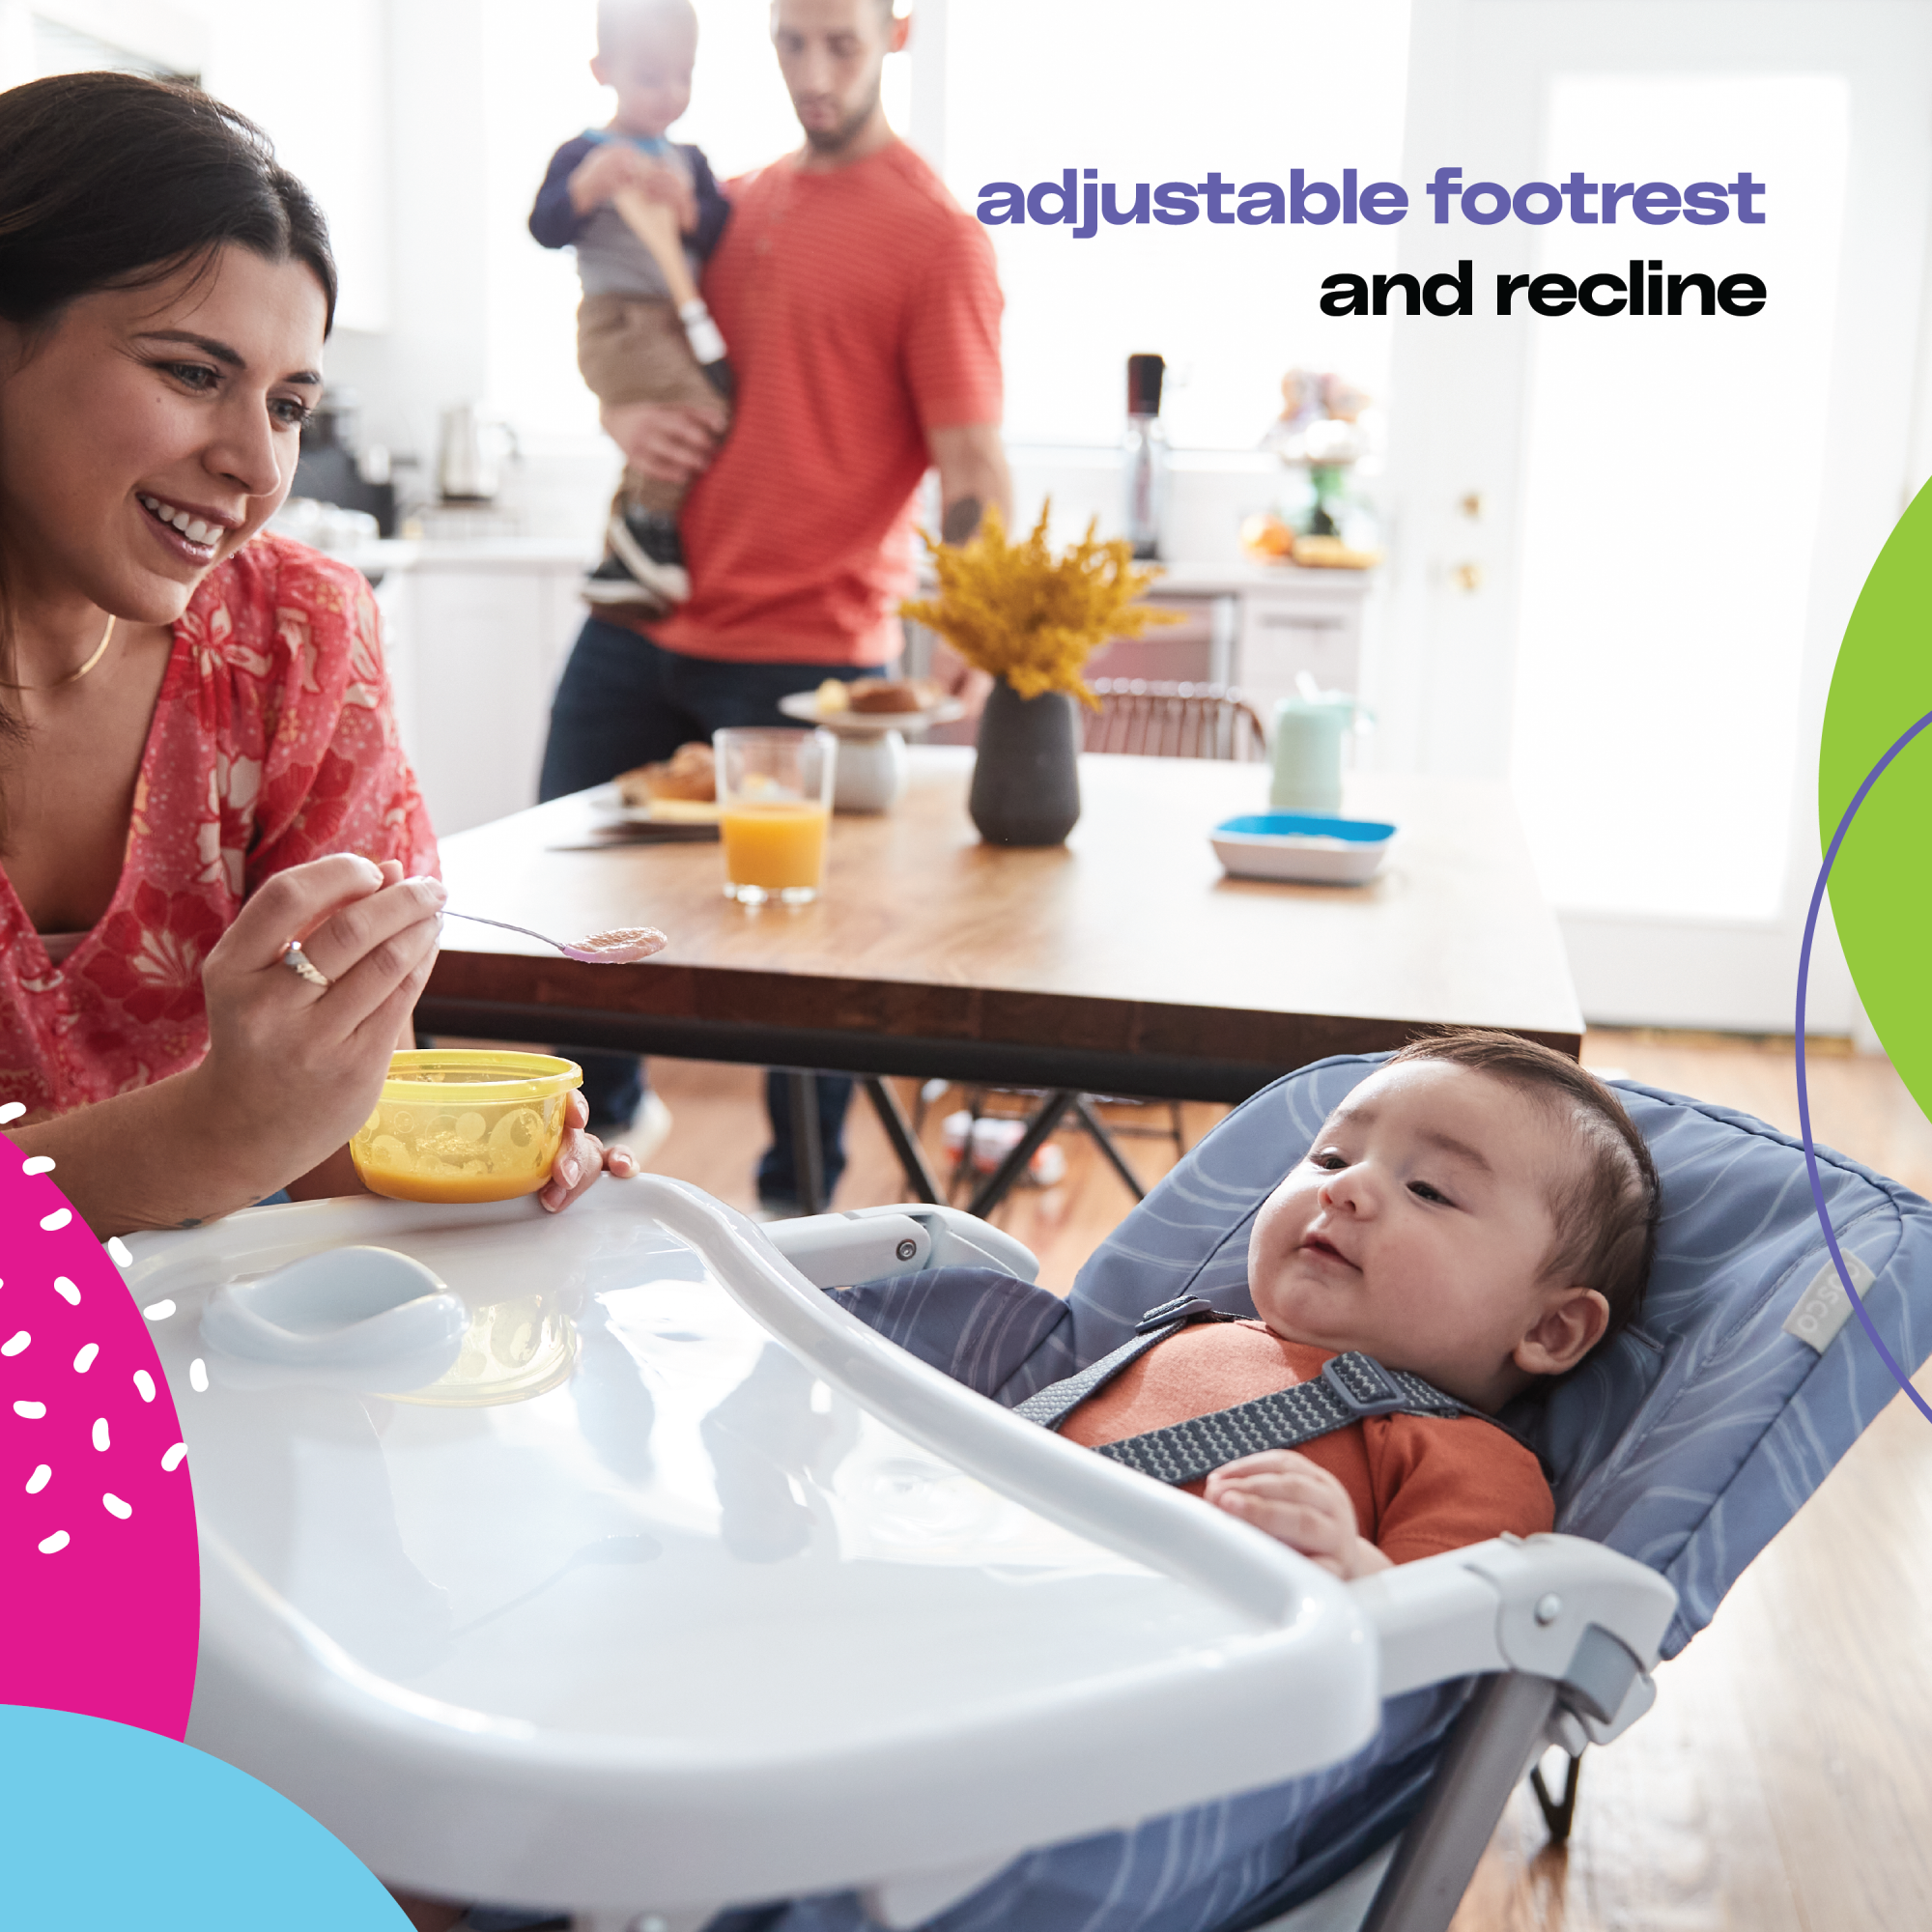 Cosco Kids™ Simple Fold™ Adjustable High Chair - Organic Waves - adjustable footrest and recline